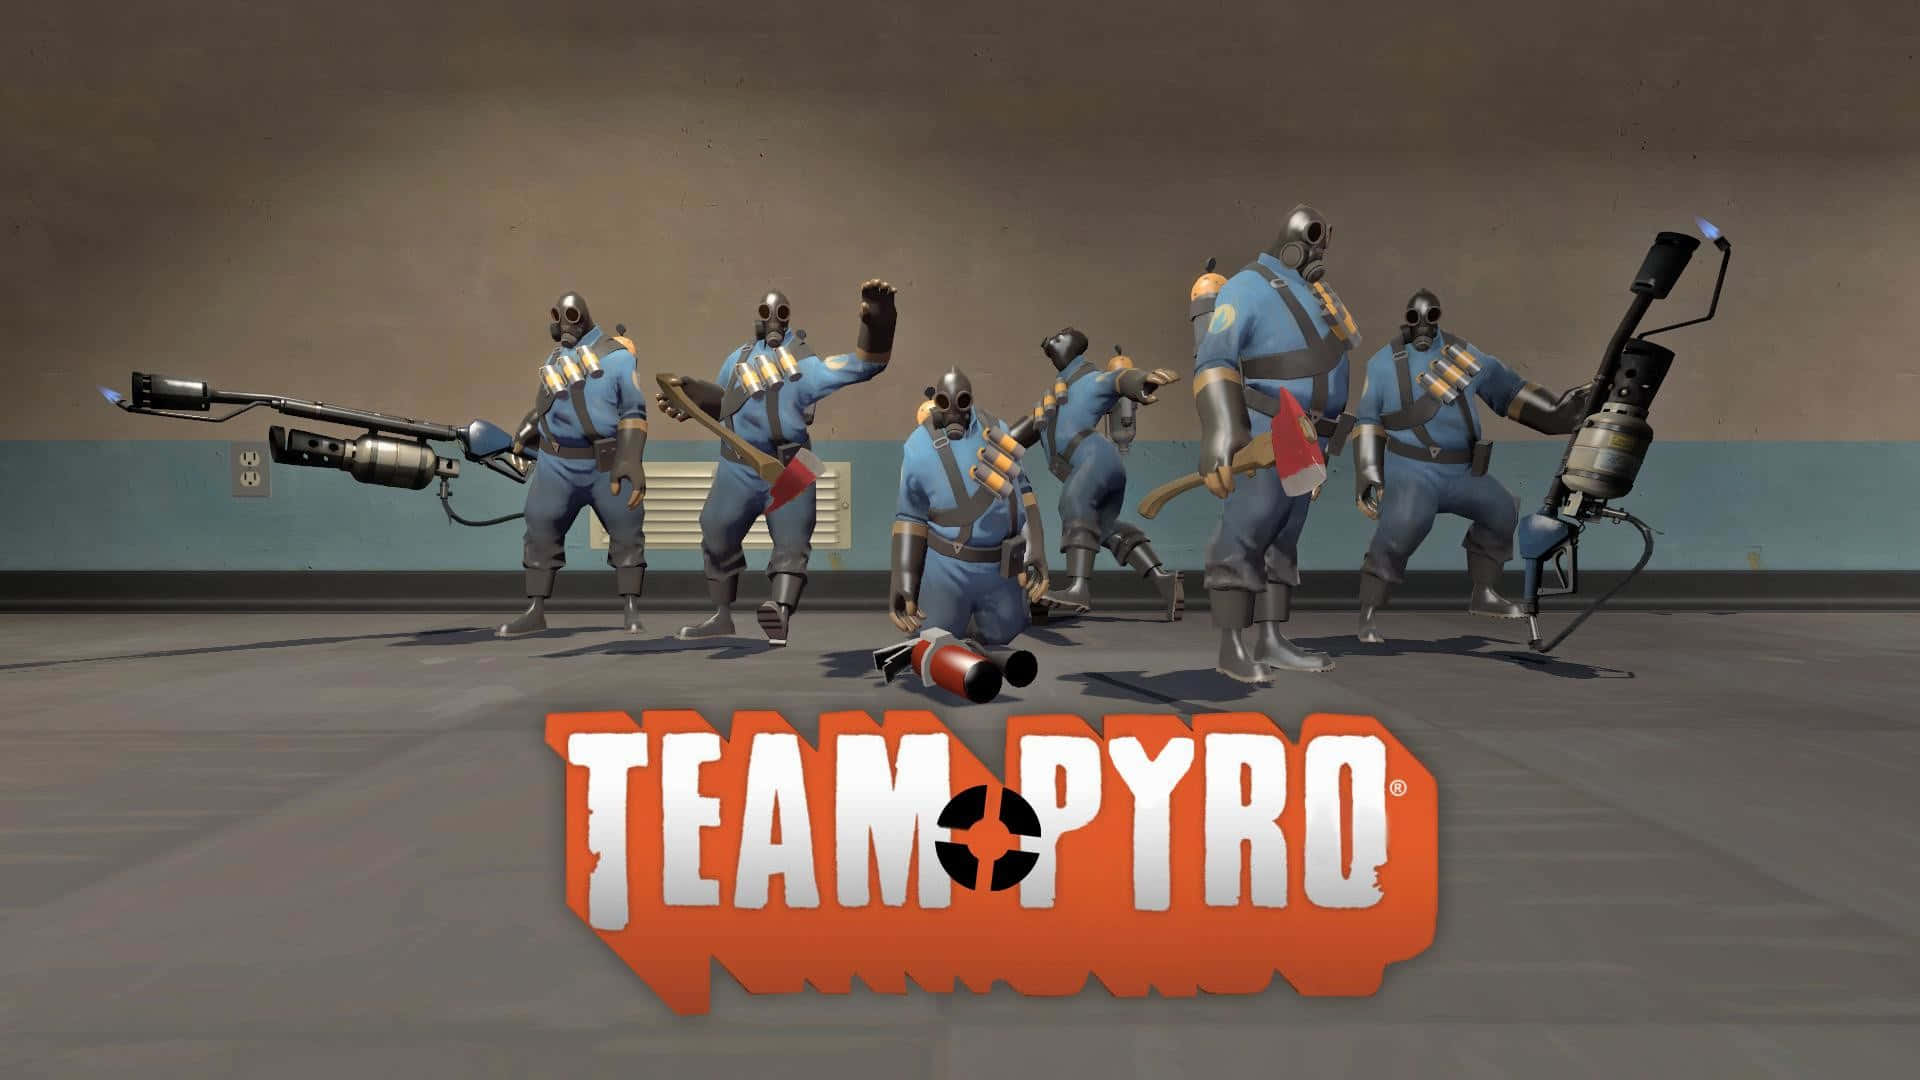 Team Pyro - A Group Of People With Guns